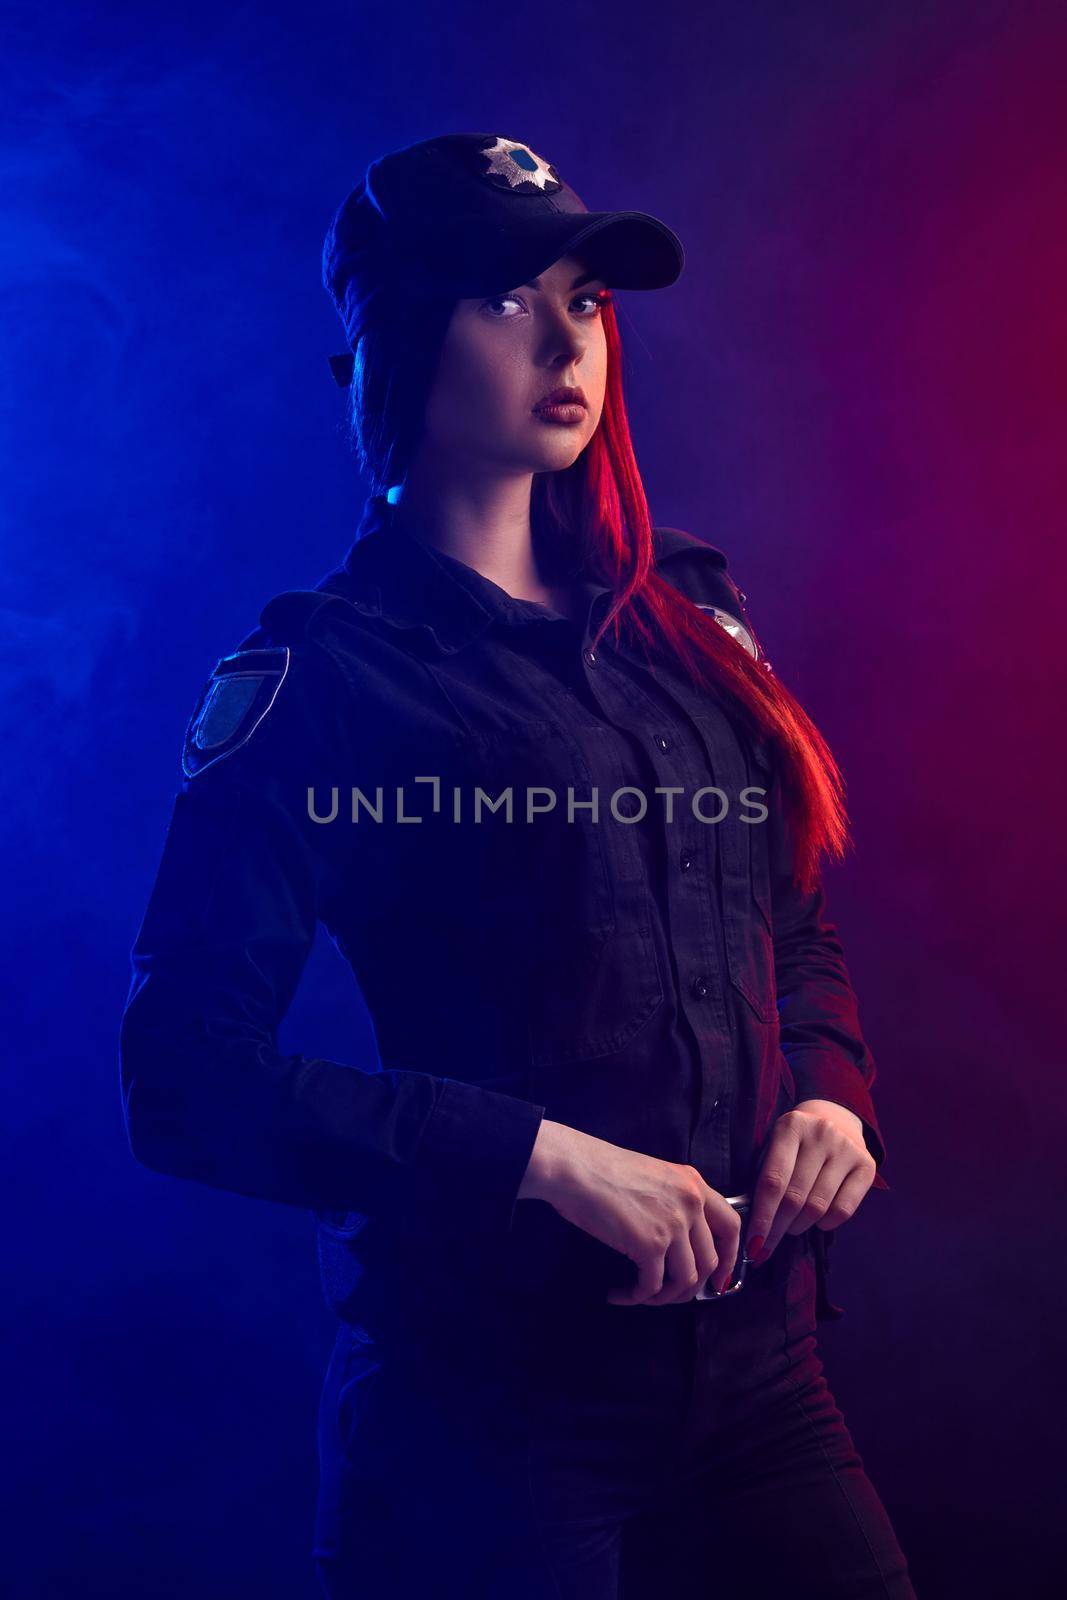 Cute redheaded woman police officer in a uniform and a cap, with bright make-up, is standing sideways, holding her belt and looking at the camera against a black background with red and blue backlighting.